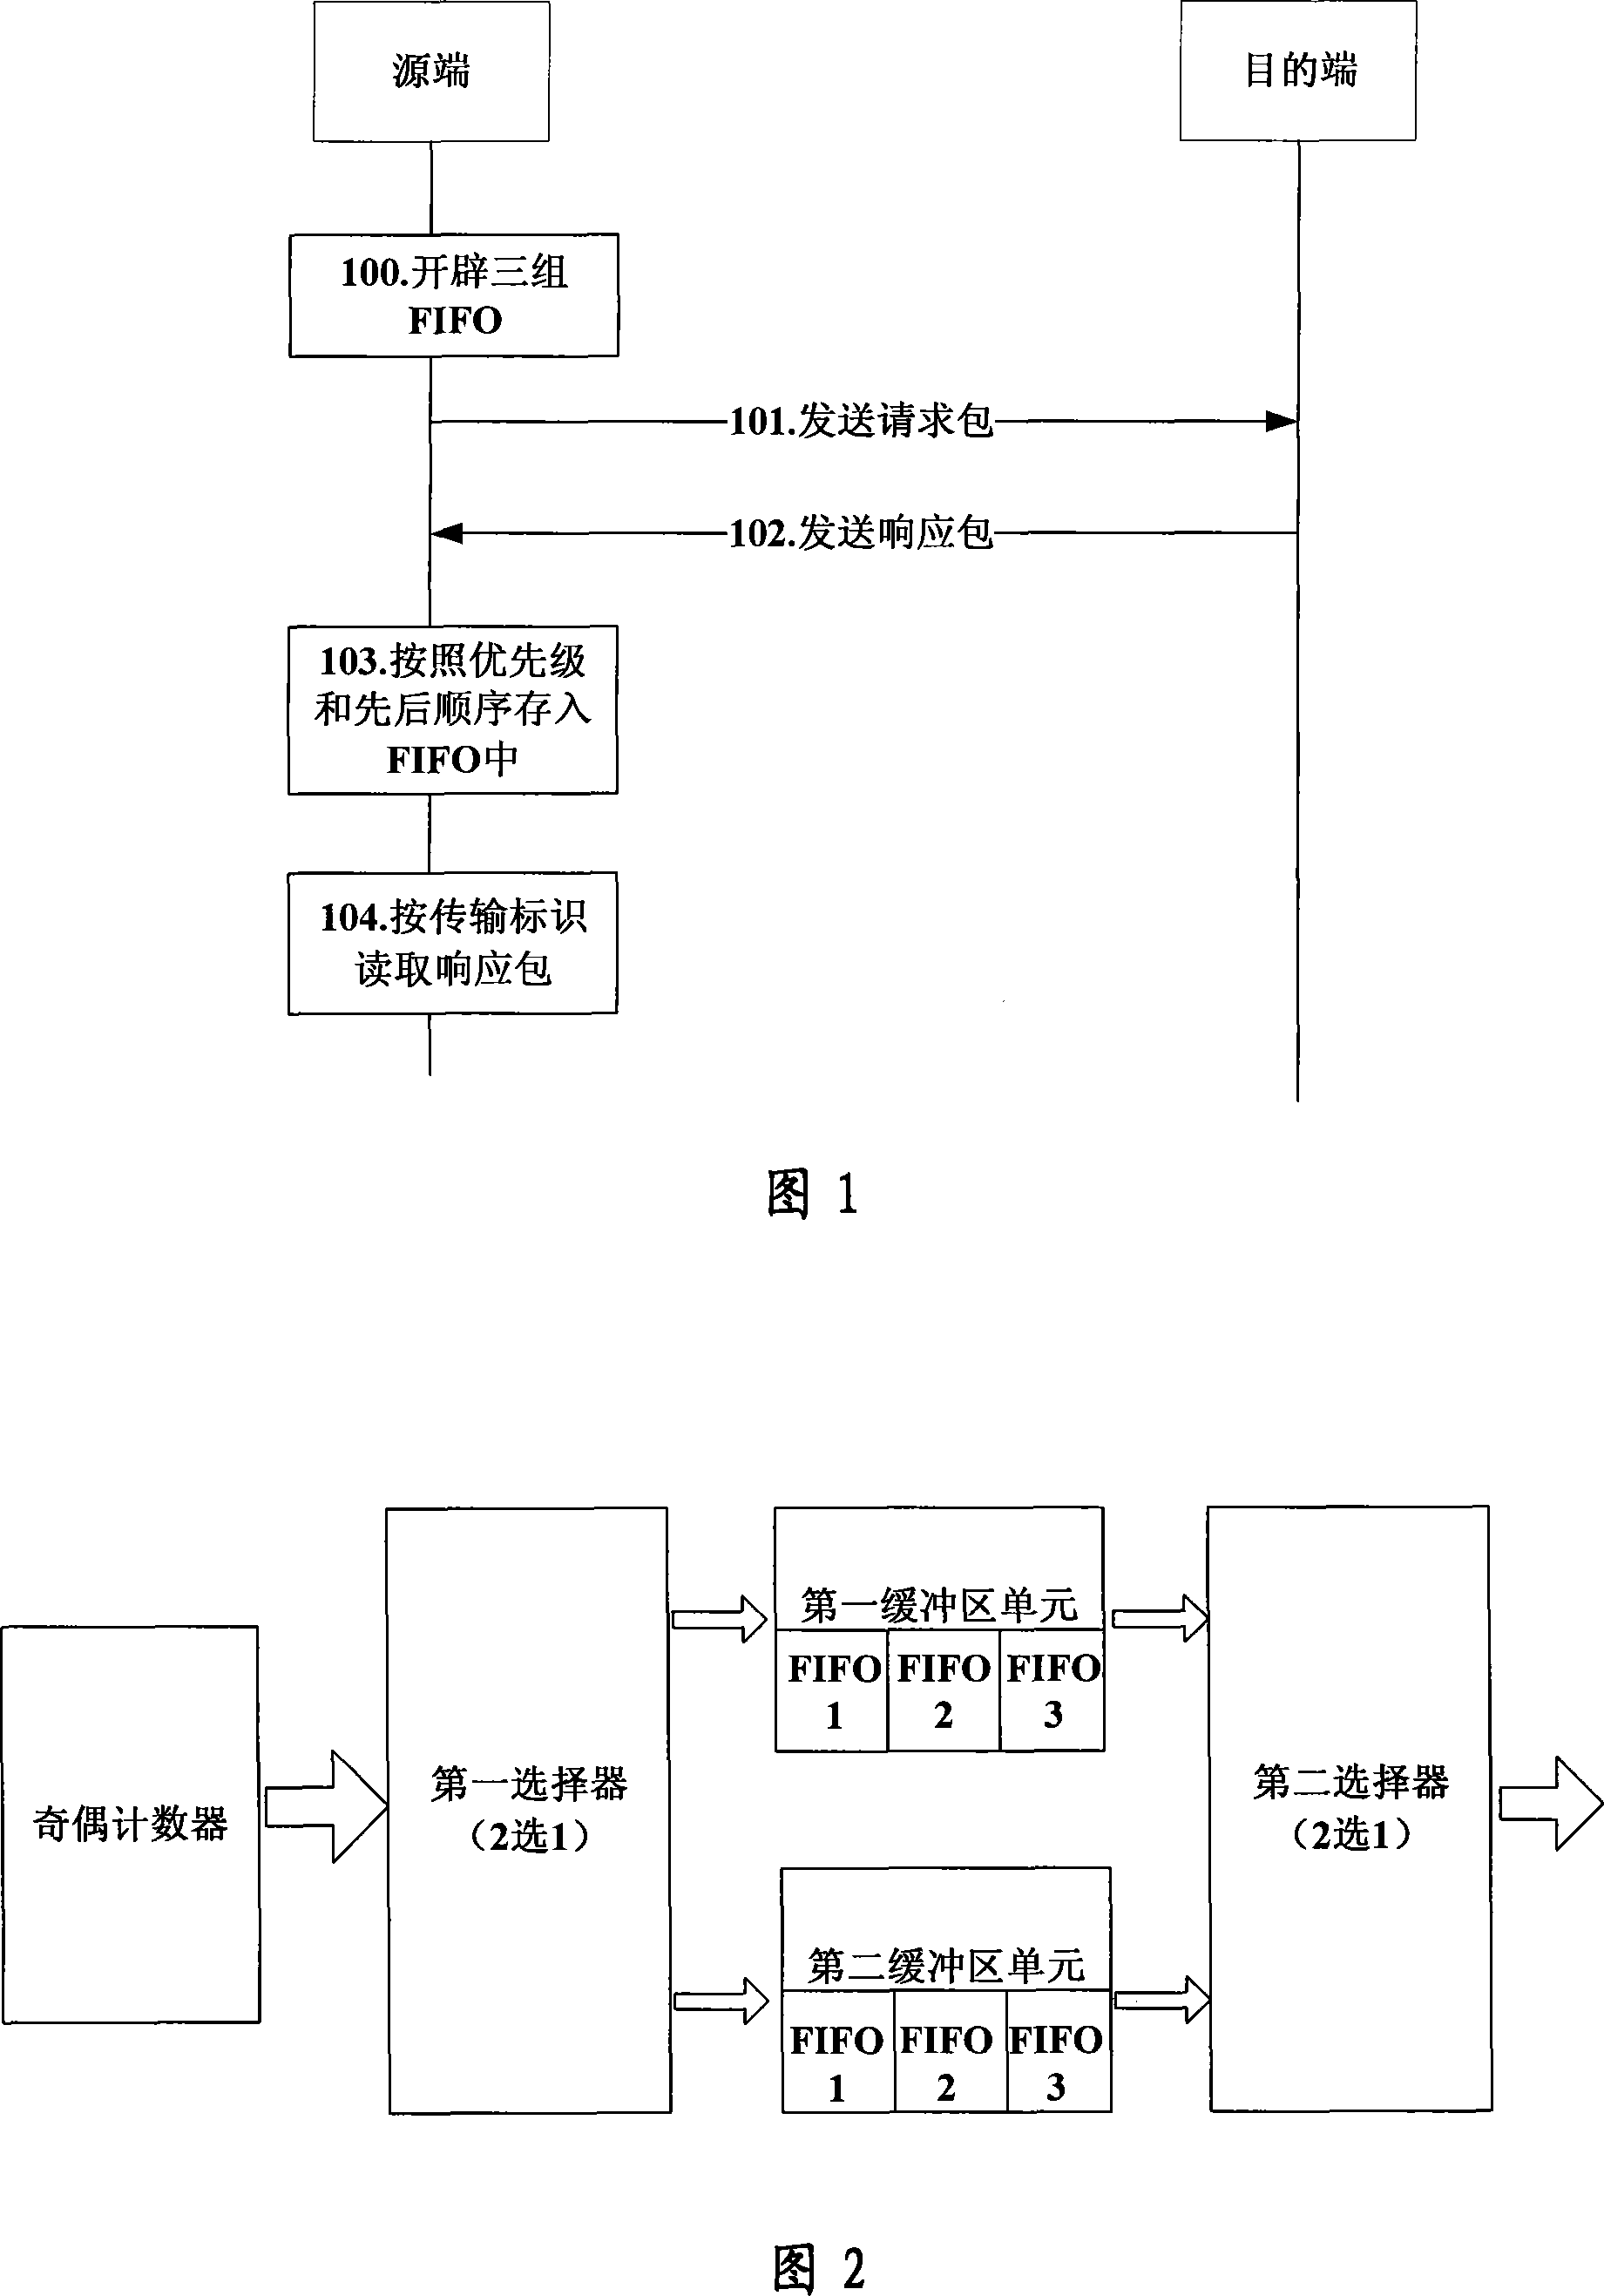 Method and apparatus for ordering data based on rapid IO interconnection technology